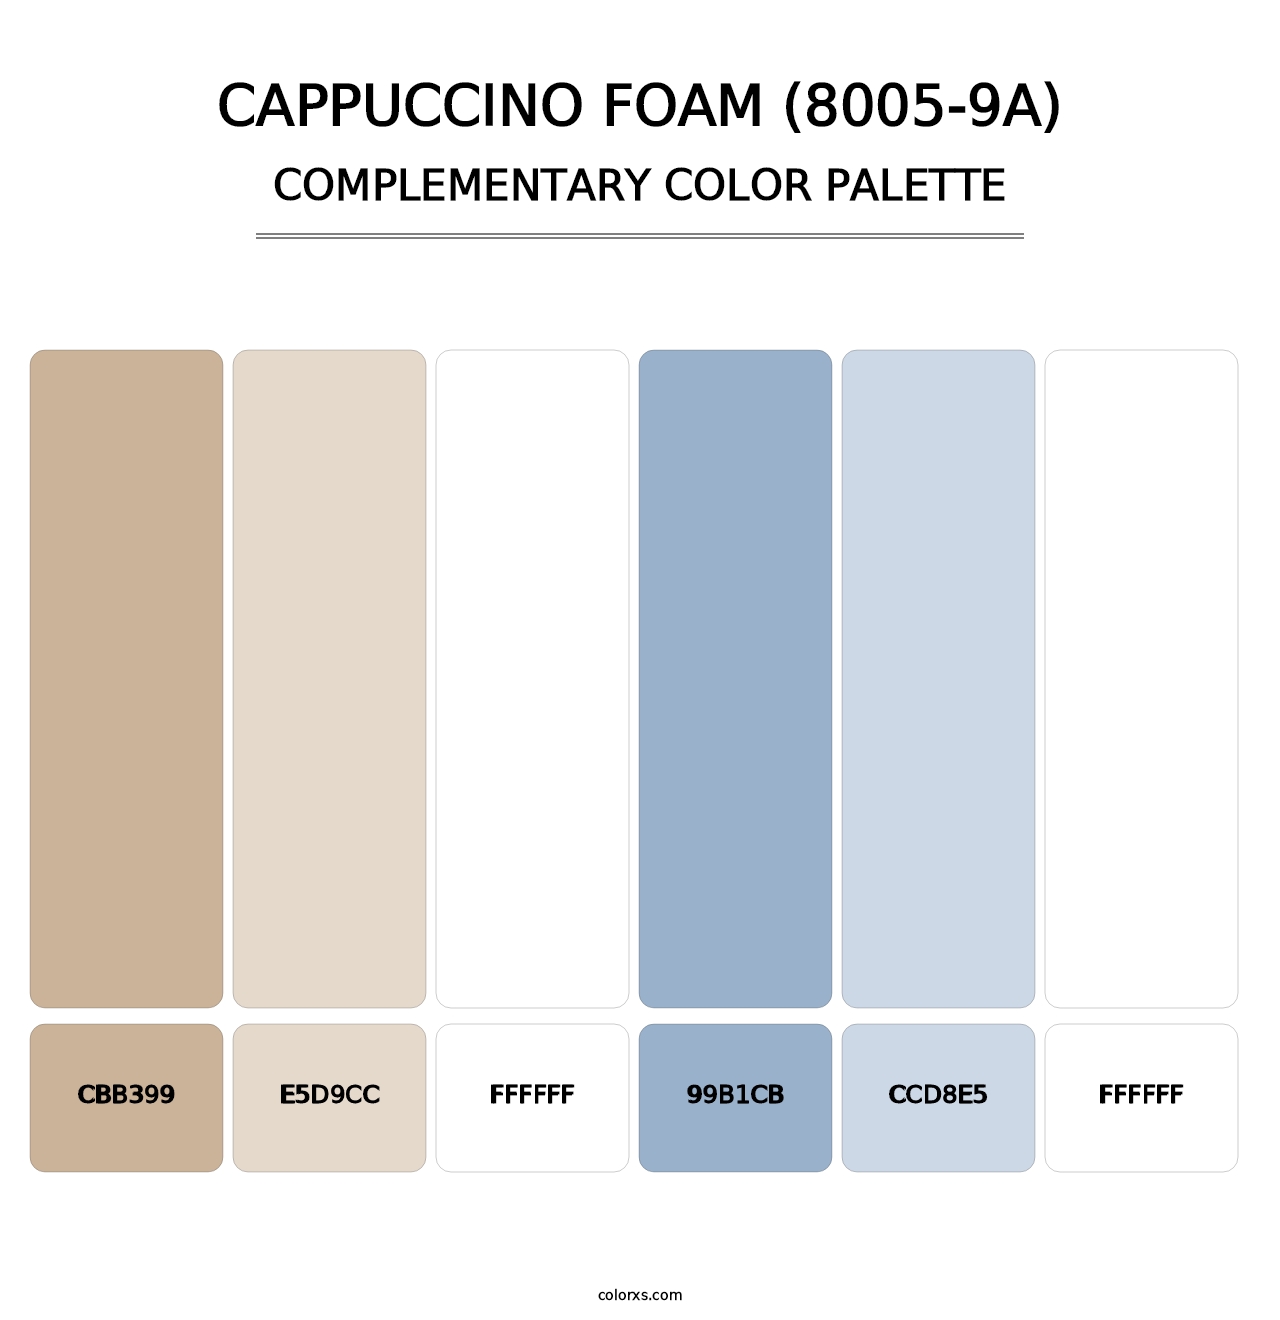 Cappuccino Foam (8005-9A) - Complementary Color Palette